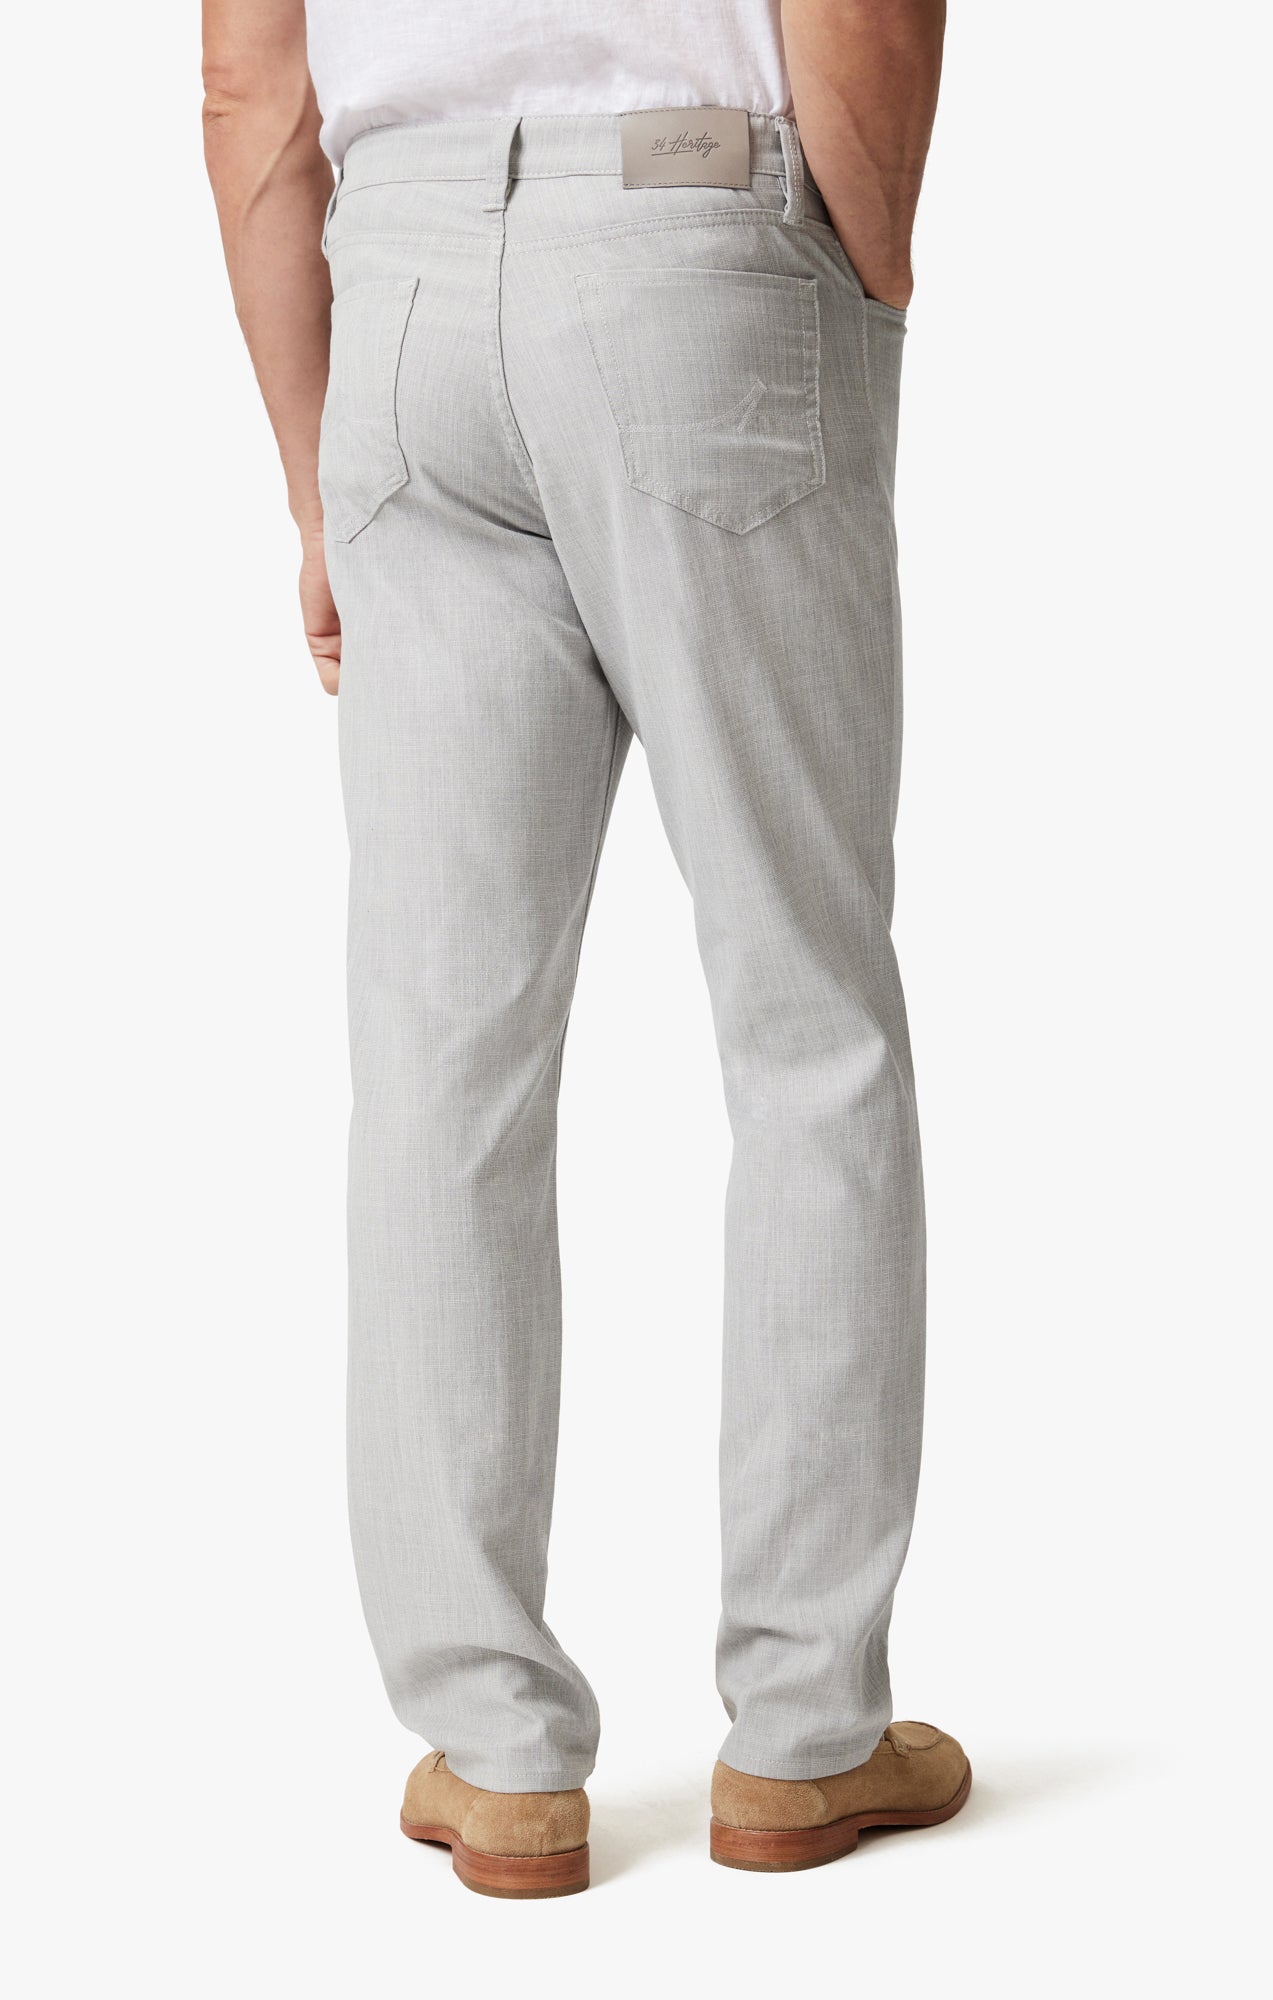 Charisma Relaxed Straight Pants in Bone Cross Twill